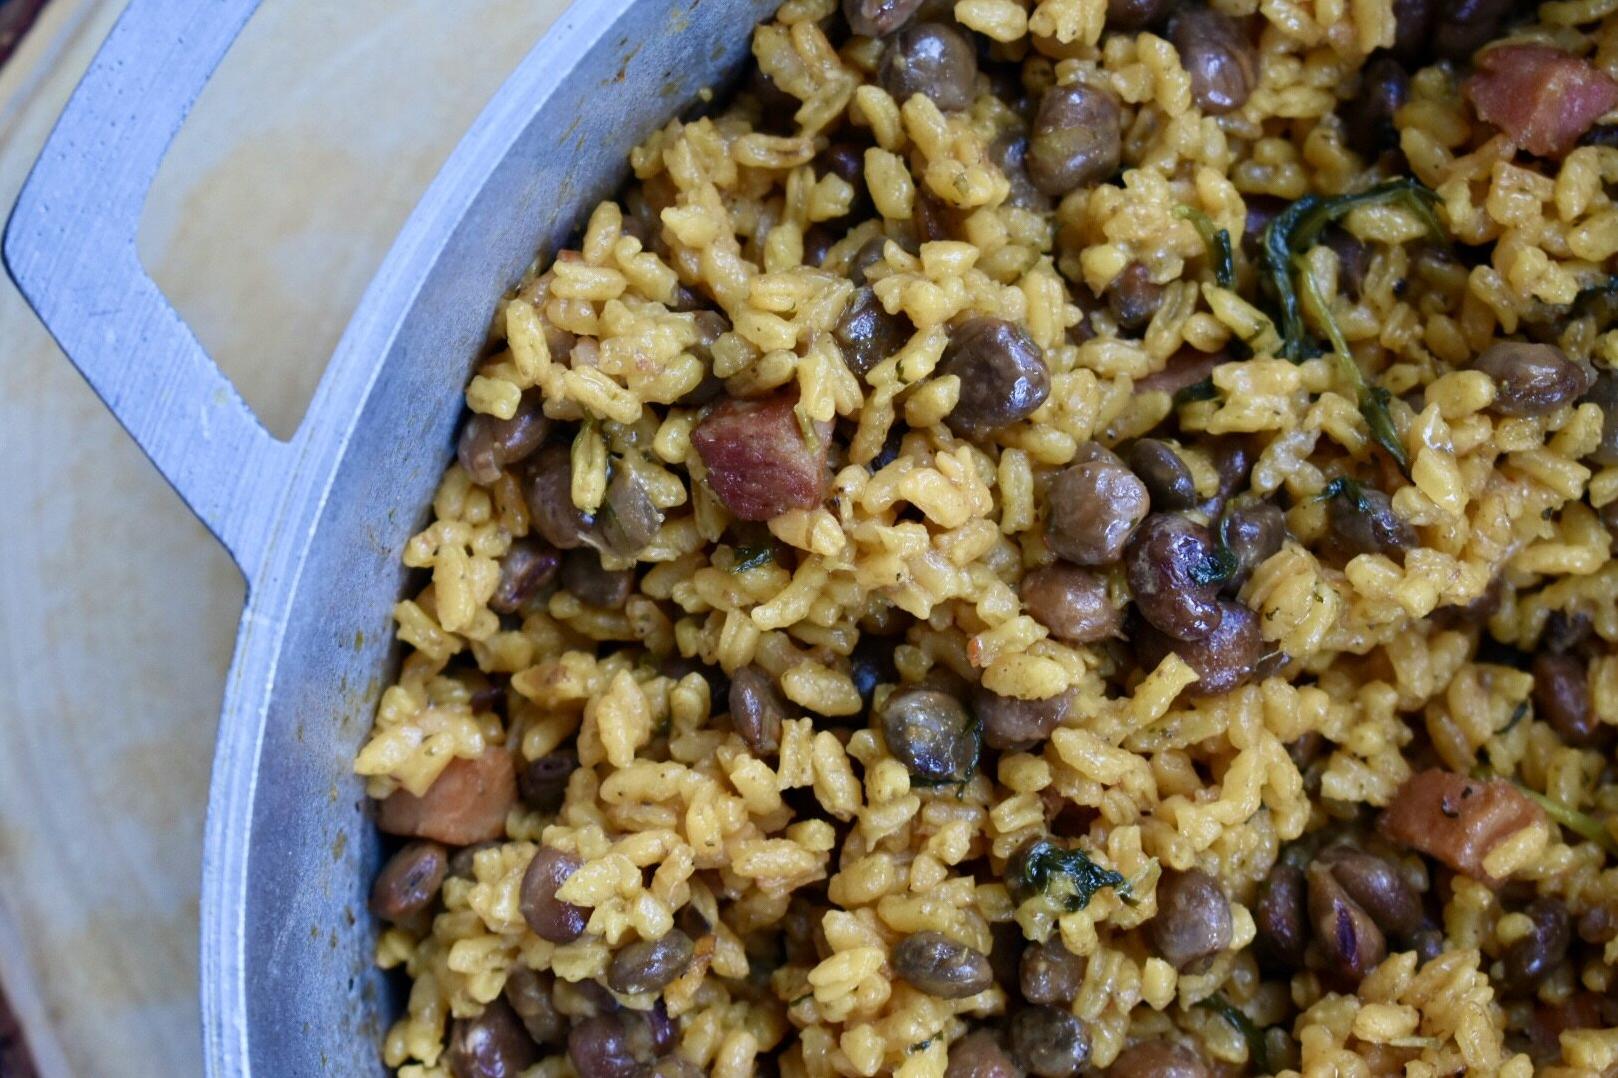  Brown rice and pigeon peas make a nutritious and satisfying meal.